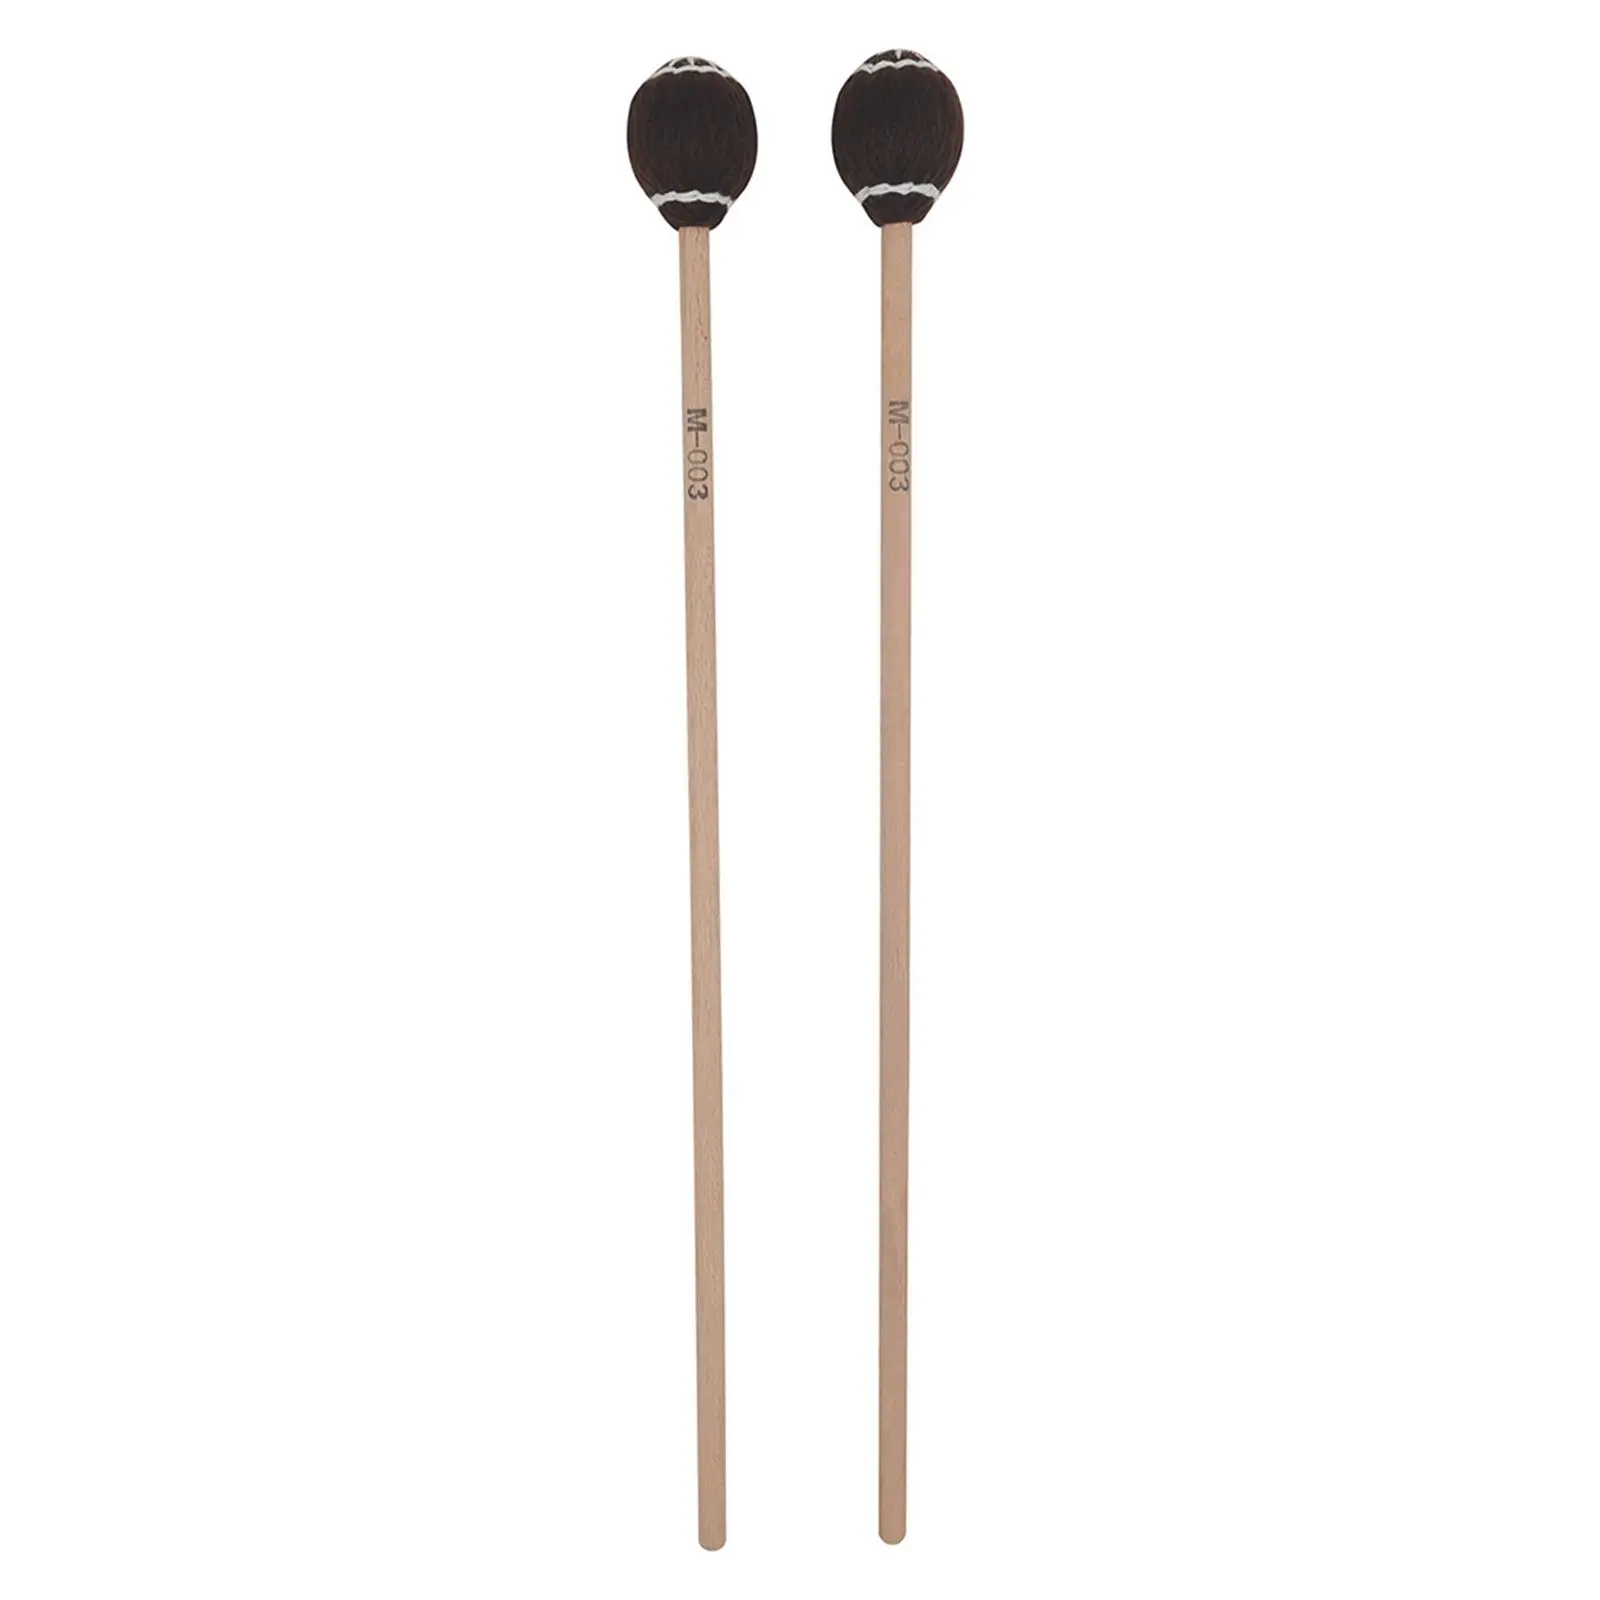 1 Pair Marimba Mallets Professionals Drumstick Drums Percussion Instrument Accessories For Beginners Training Music Lover Gifts